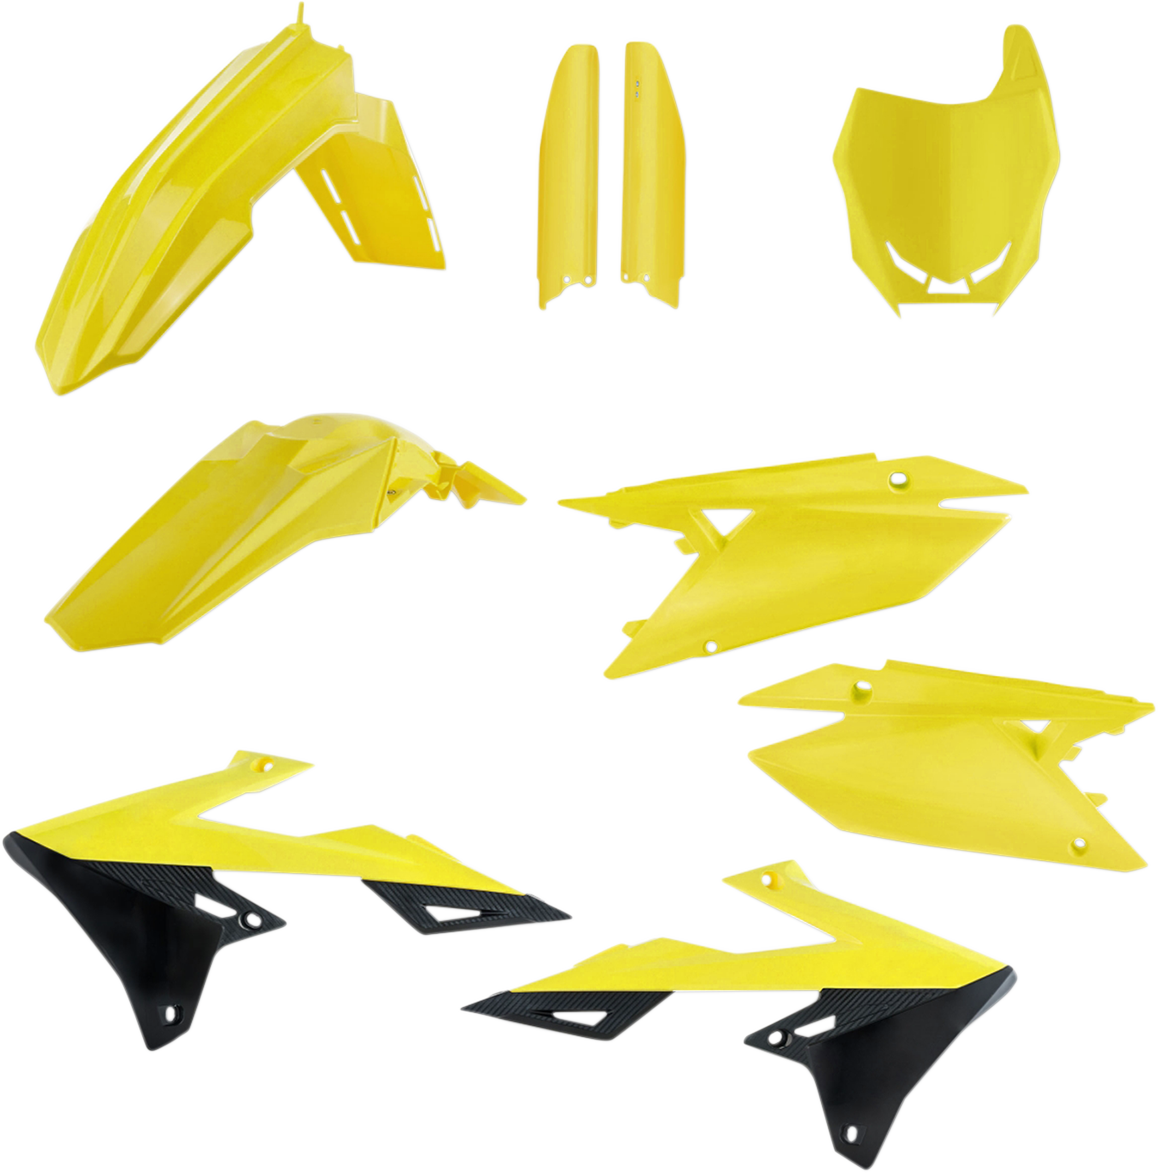 ACERBIS Full Replacement Body Kit - Fluorescent Yellow 2686554310